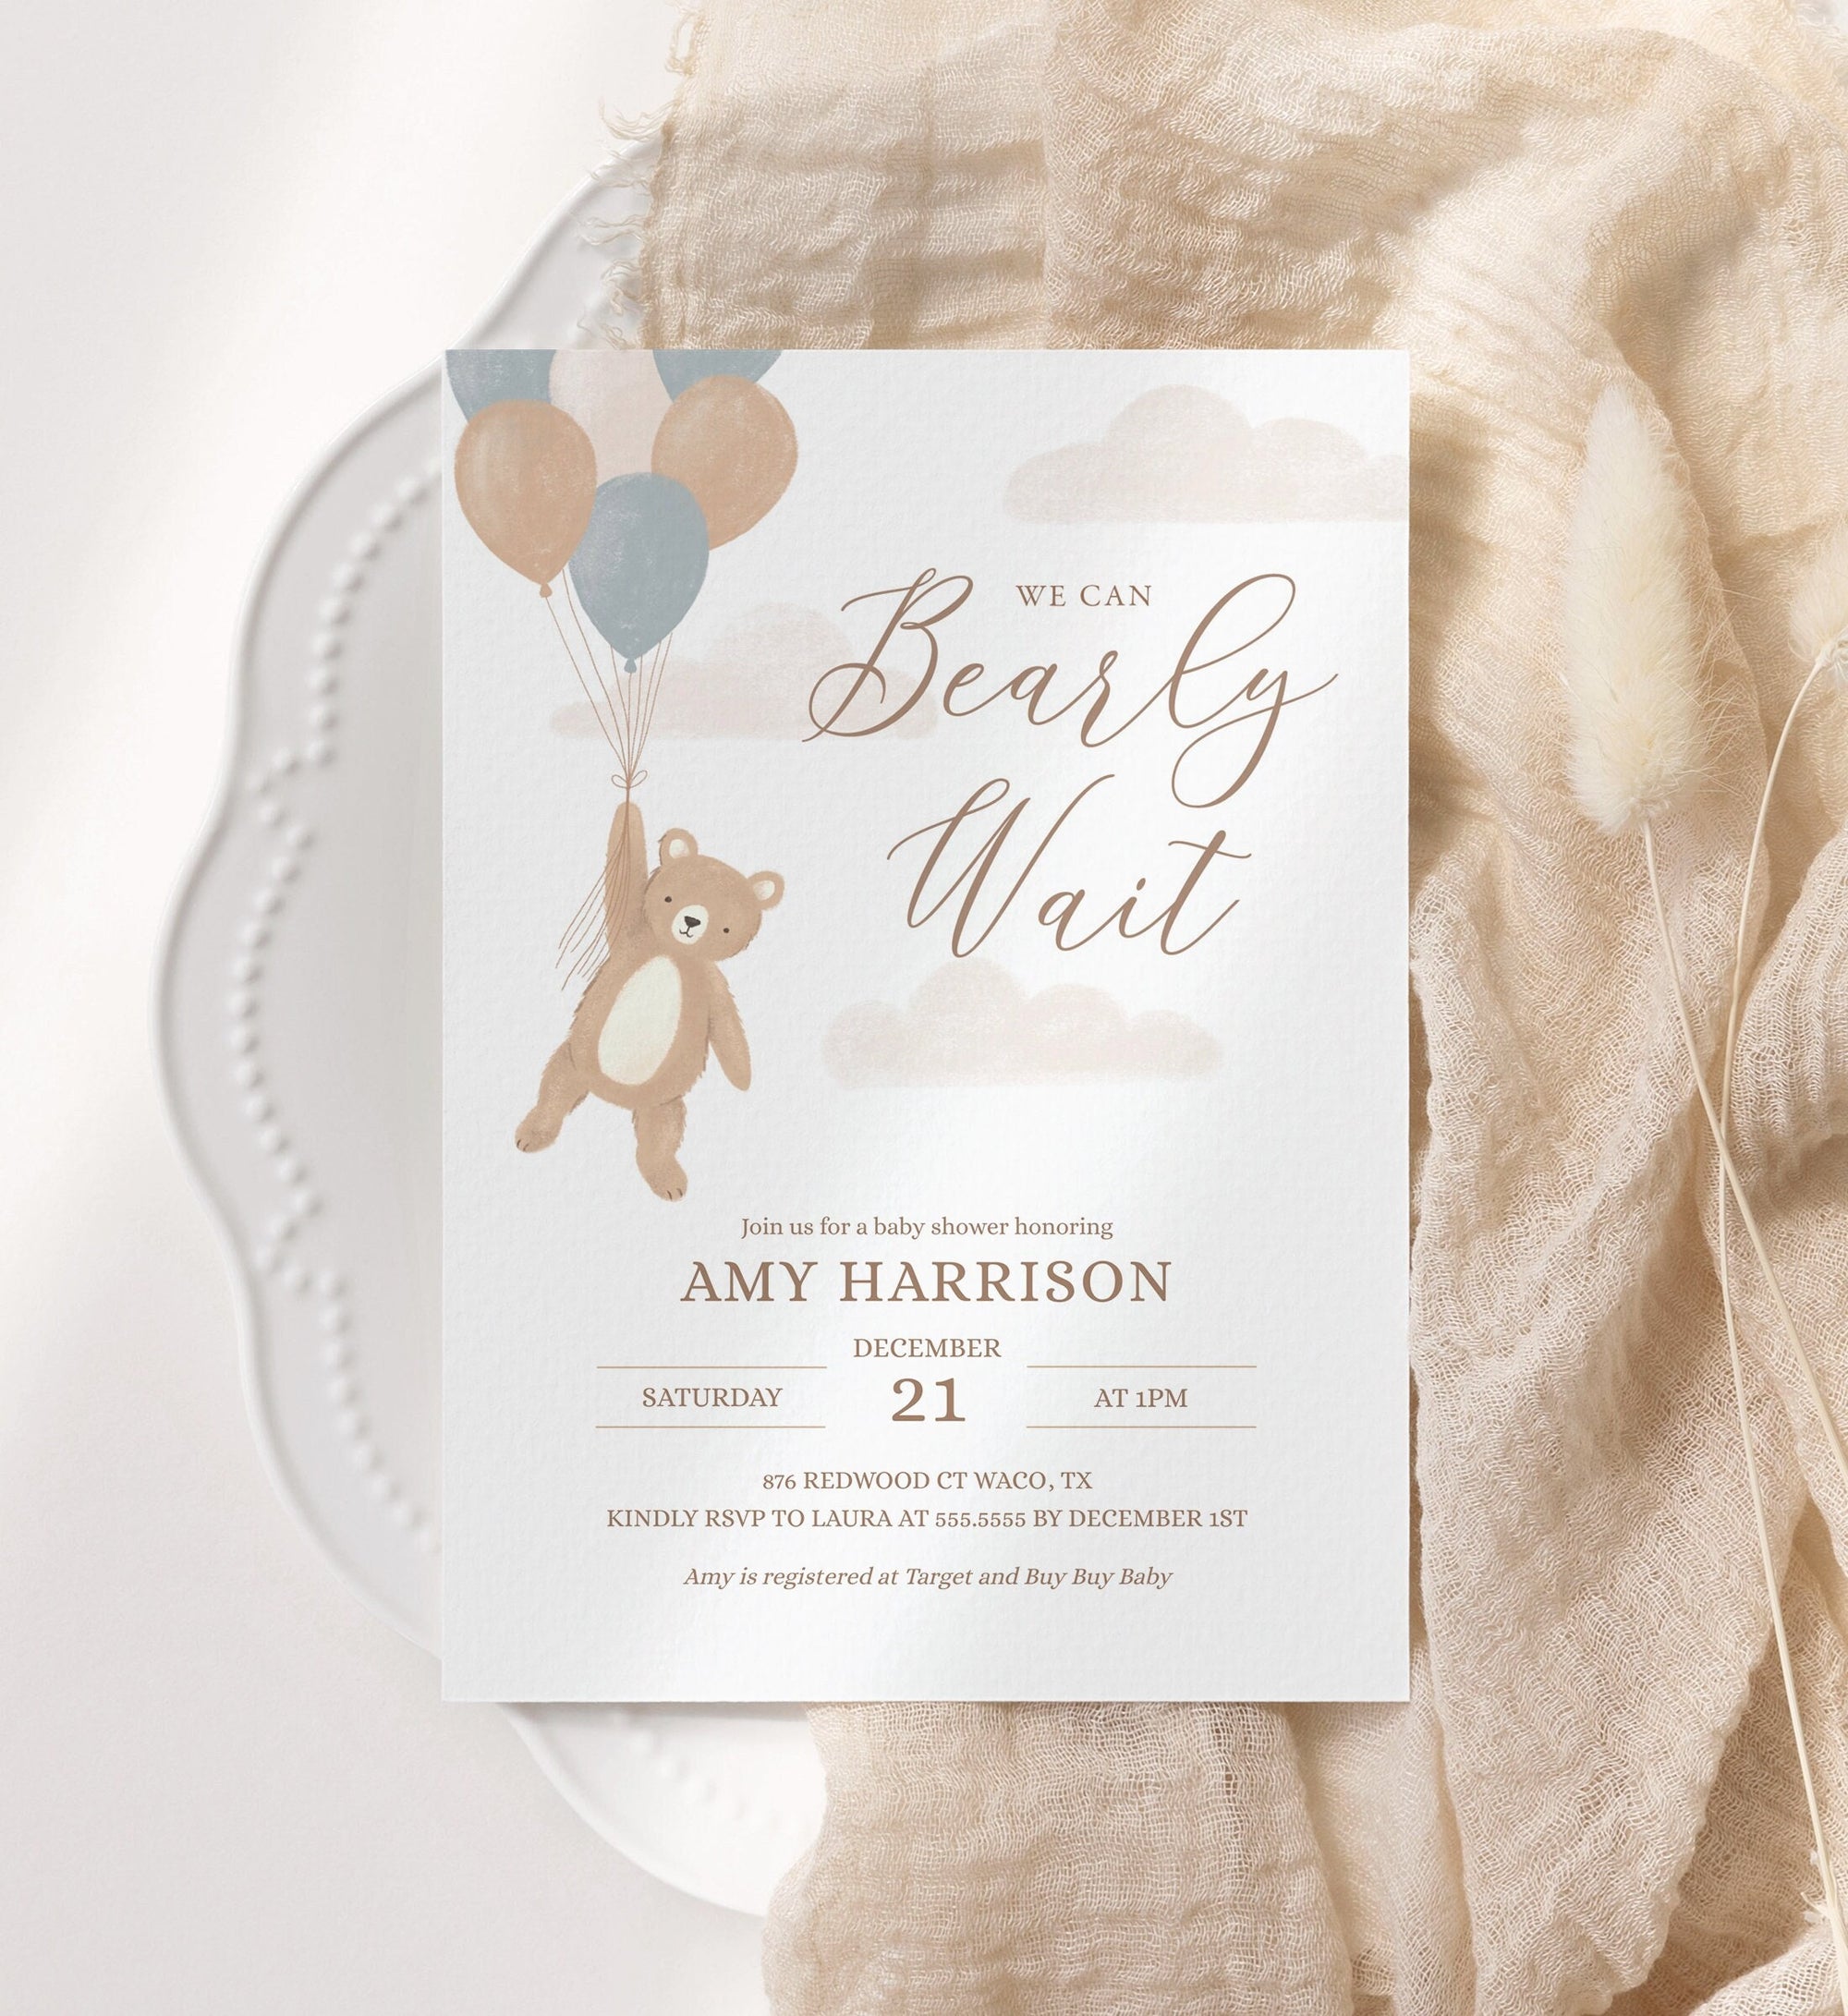 We Can Bearly Wait Baby Shower Invitation, Teddy Bear Balloon Boy Baby Shower Invite, Printable Invitation Template, DIGITAL DOWNLOAD